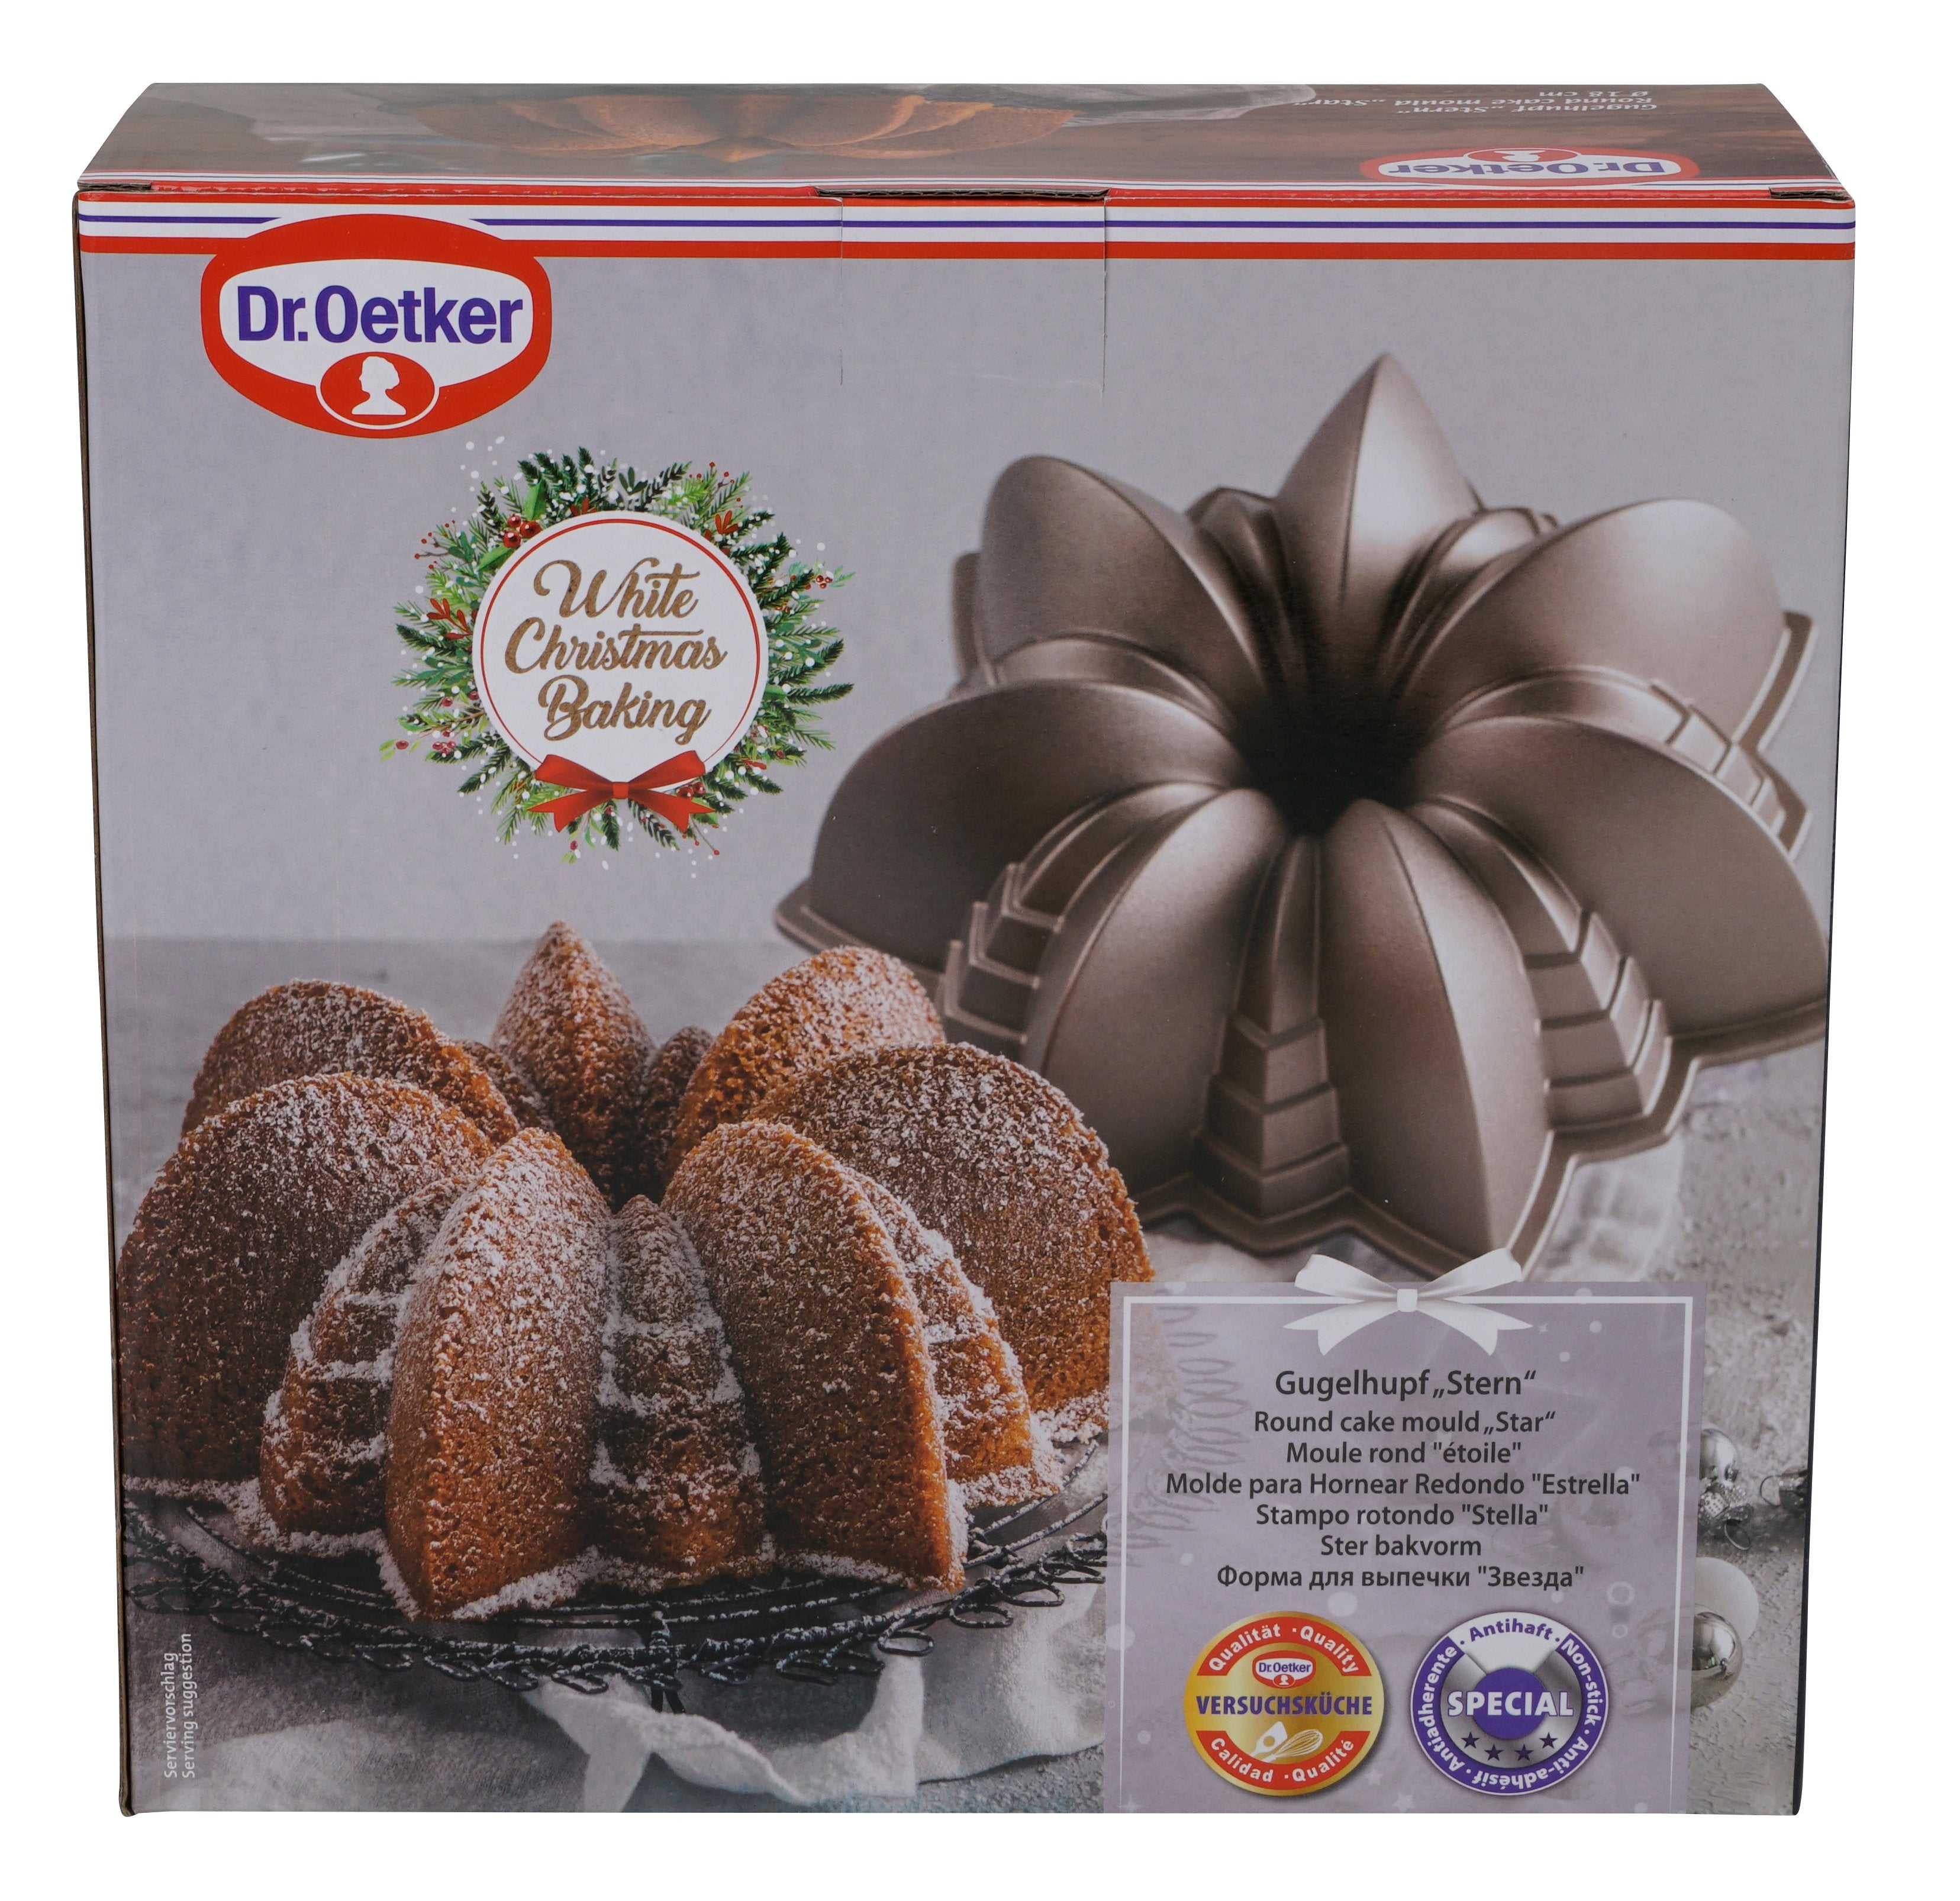 Dr.Oetker Round Cake Mould "Star", 23X8 cm - Whole and All